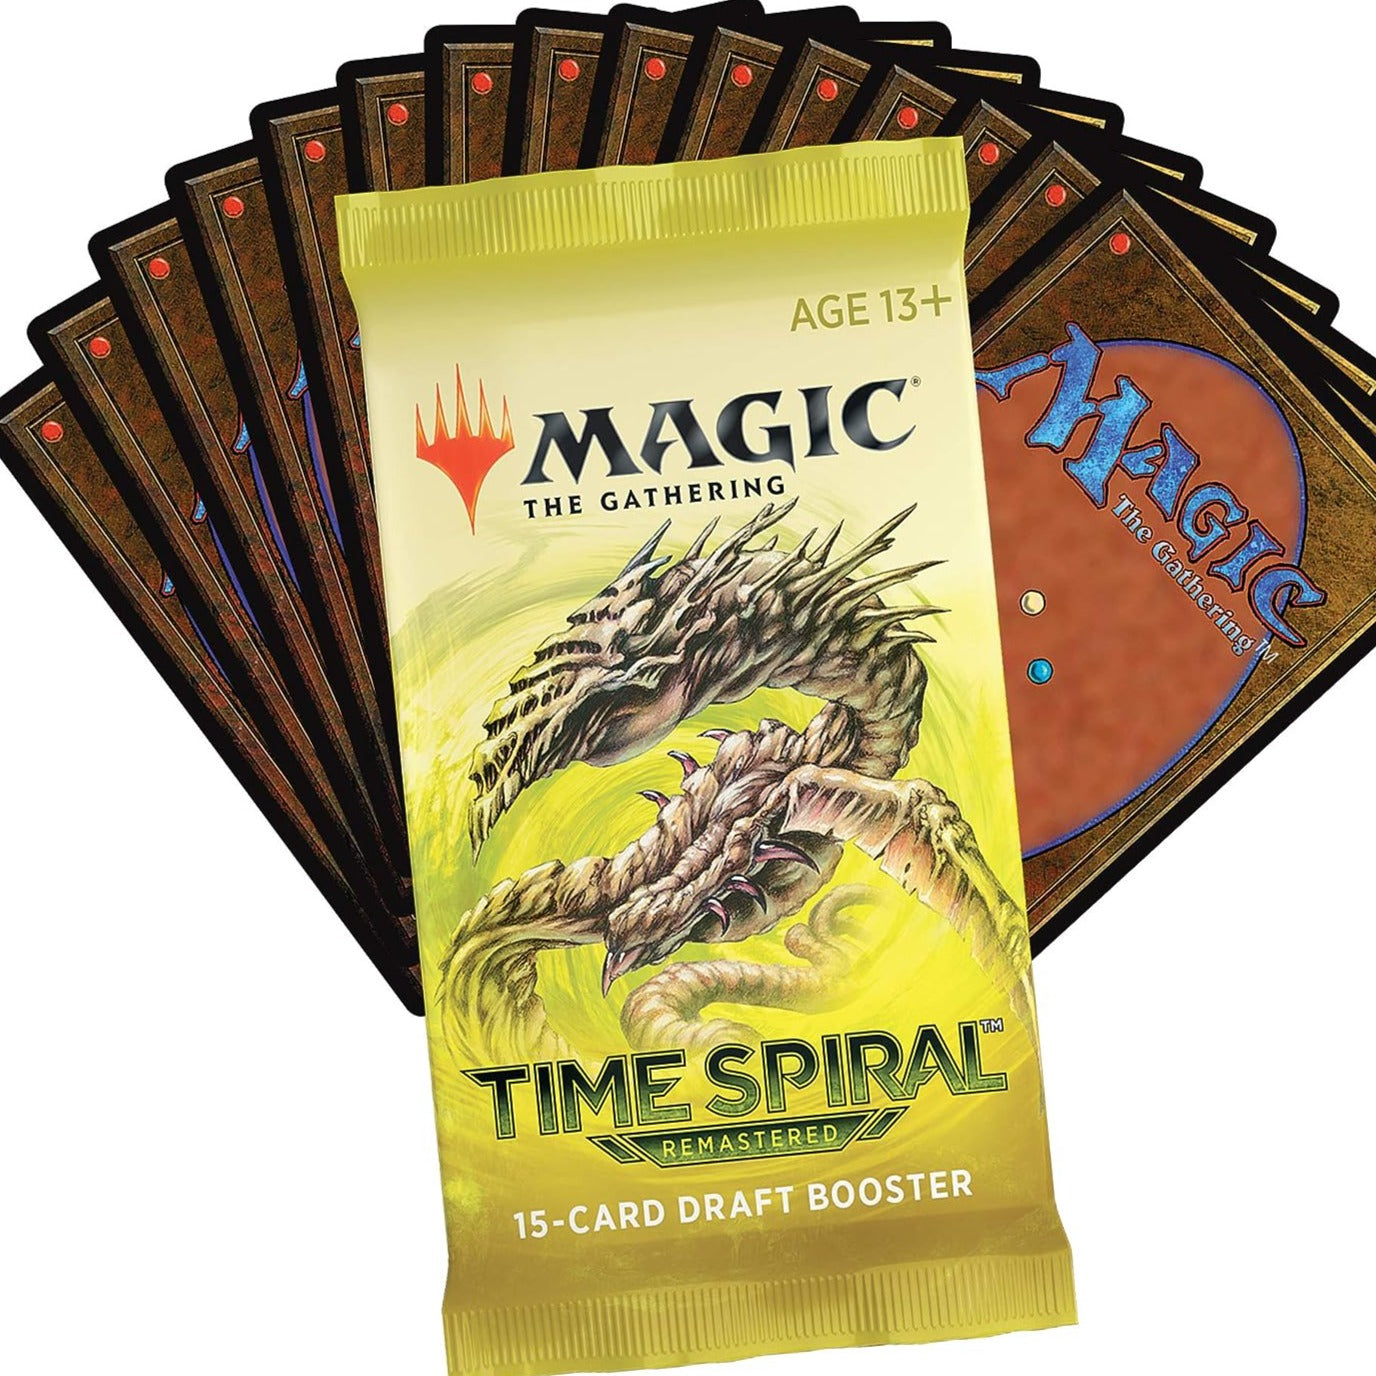 Time spiral remastered booster pack